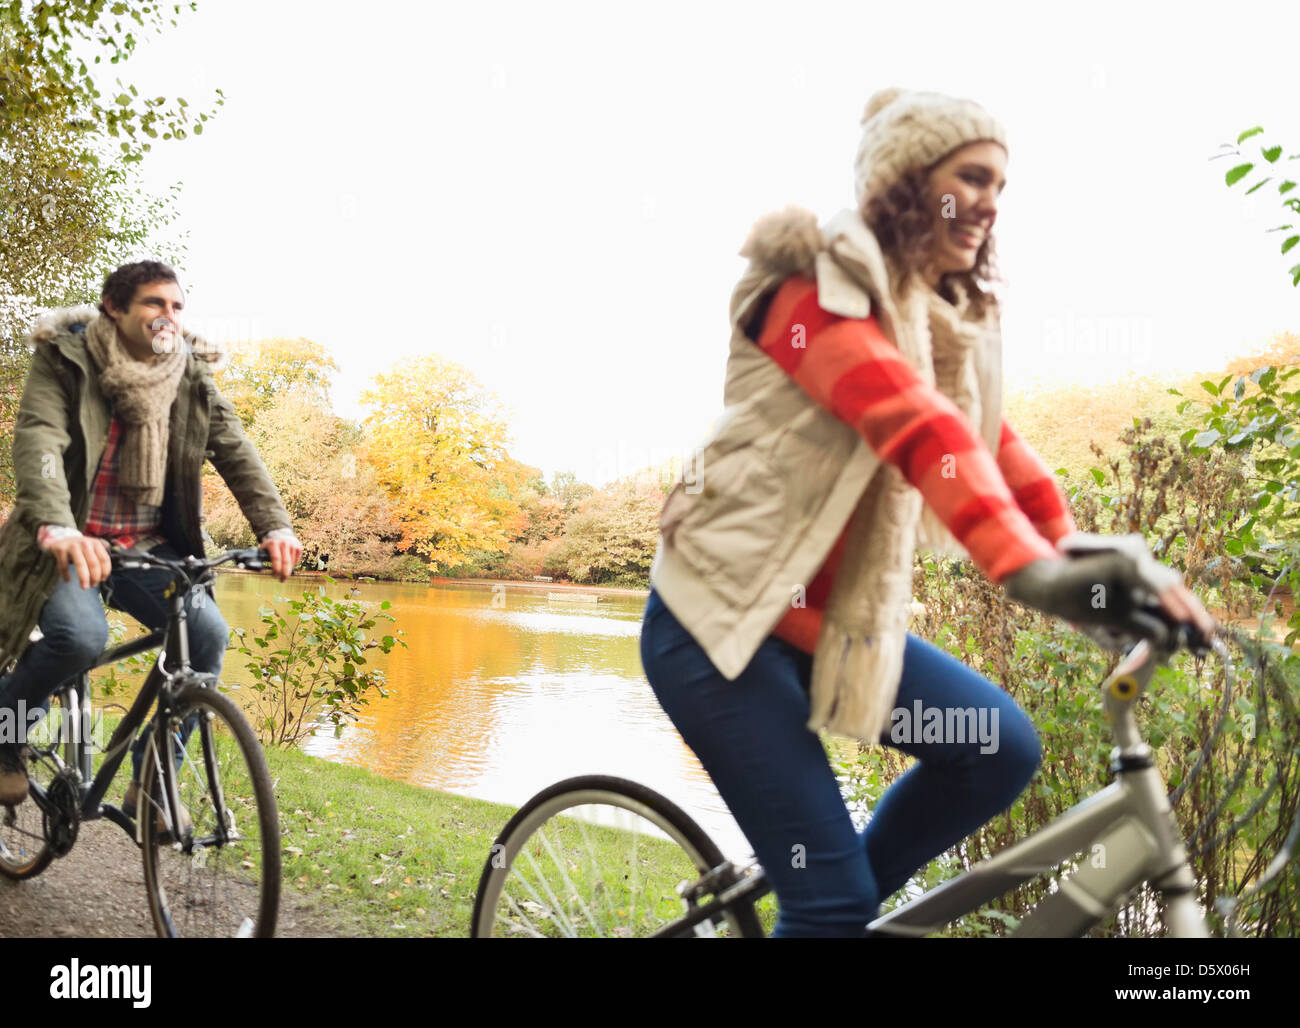 Couple riding bicycles in park Banque D'Images